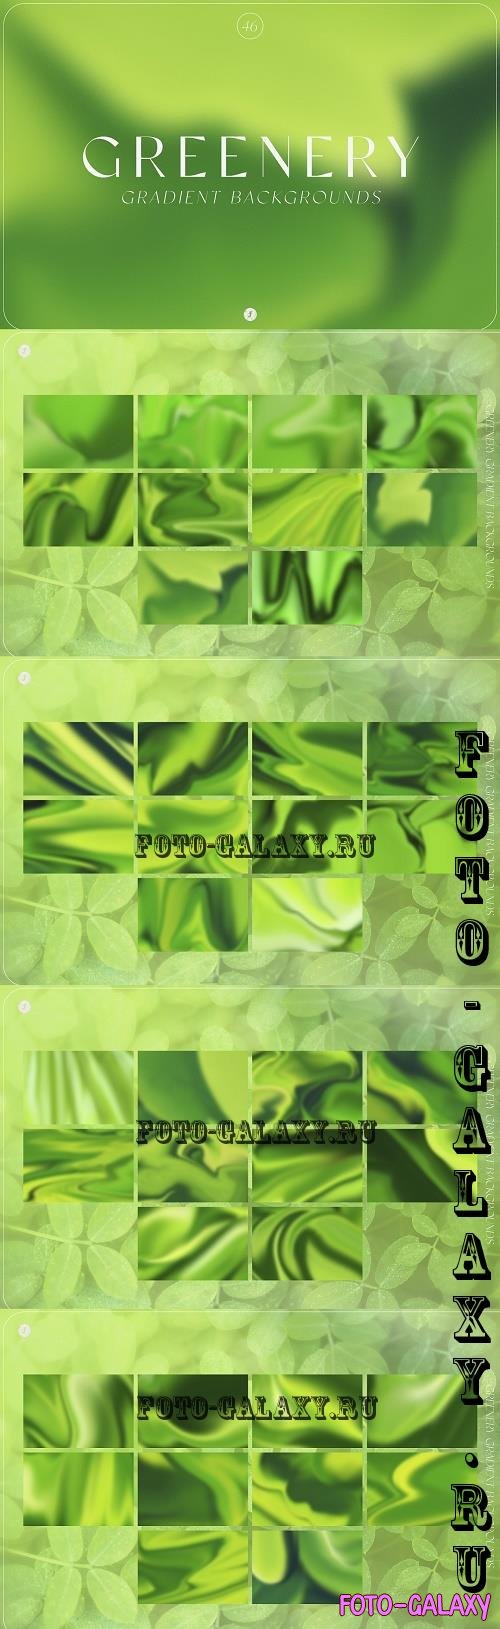 Greenery Gradient Backgrounds - 13456209